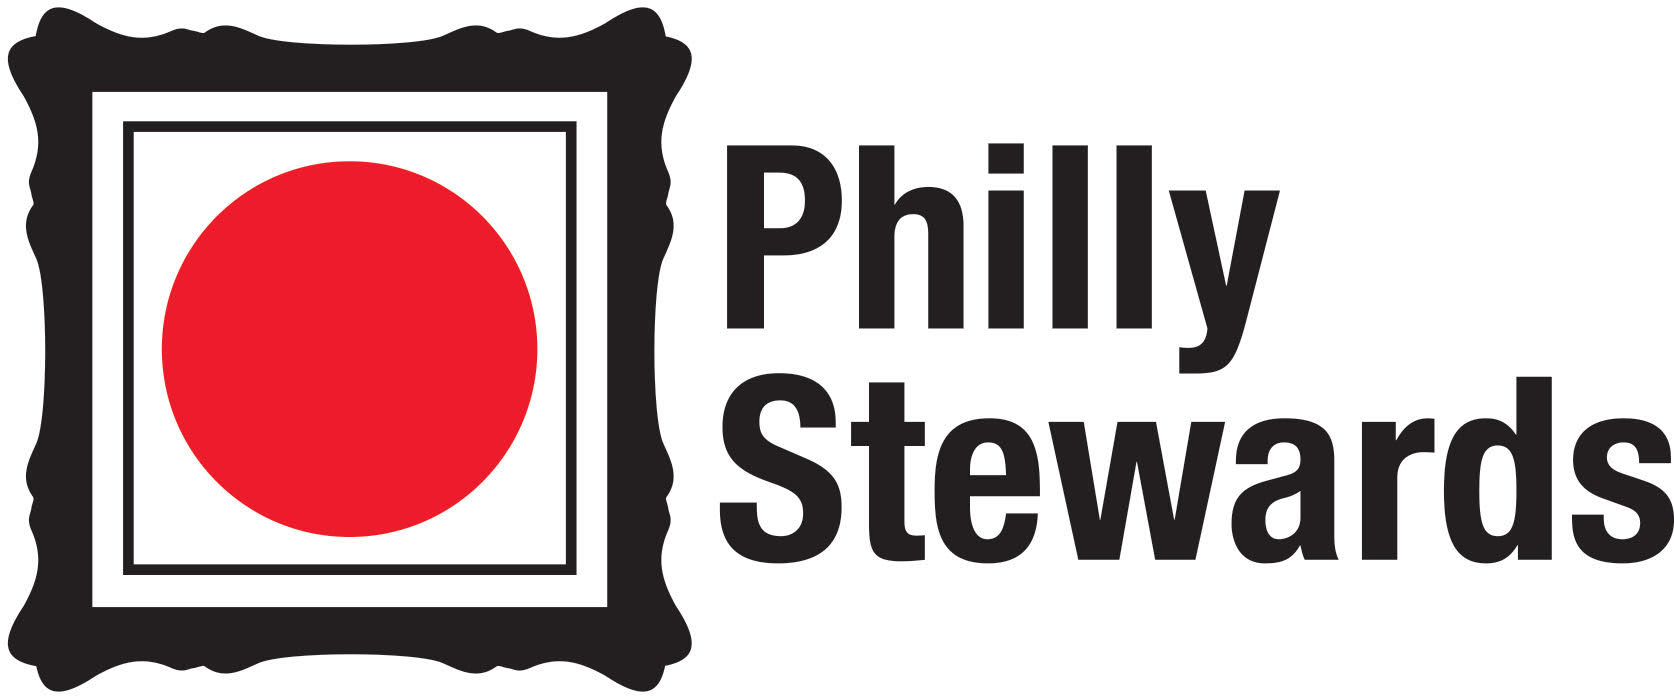 philly-stewards.md